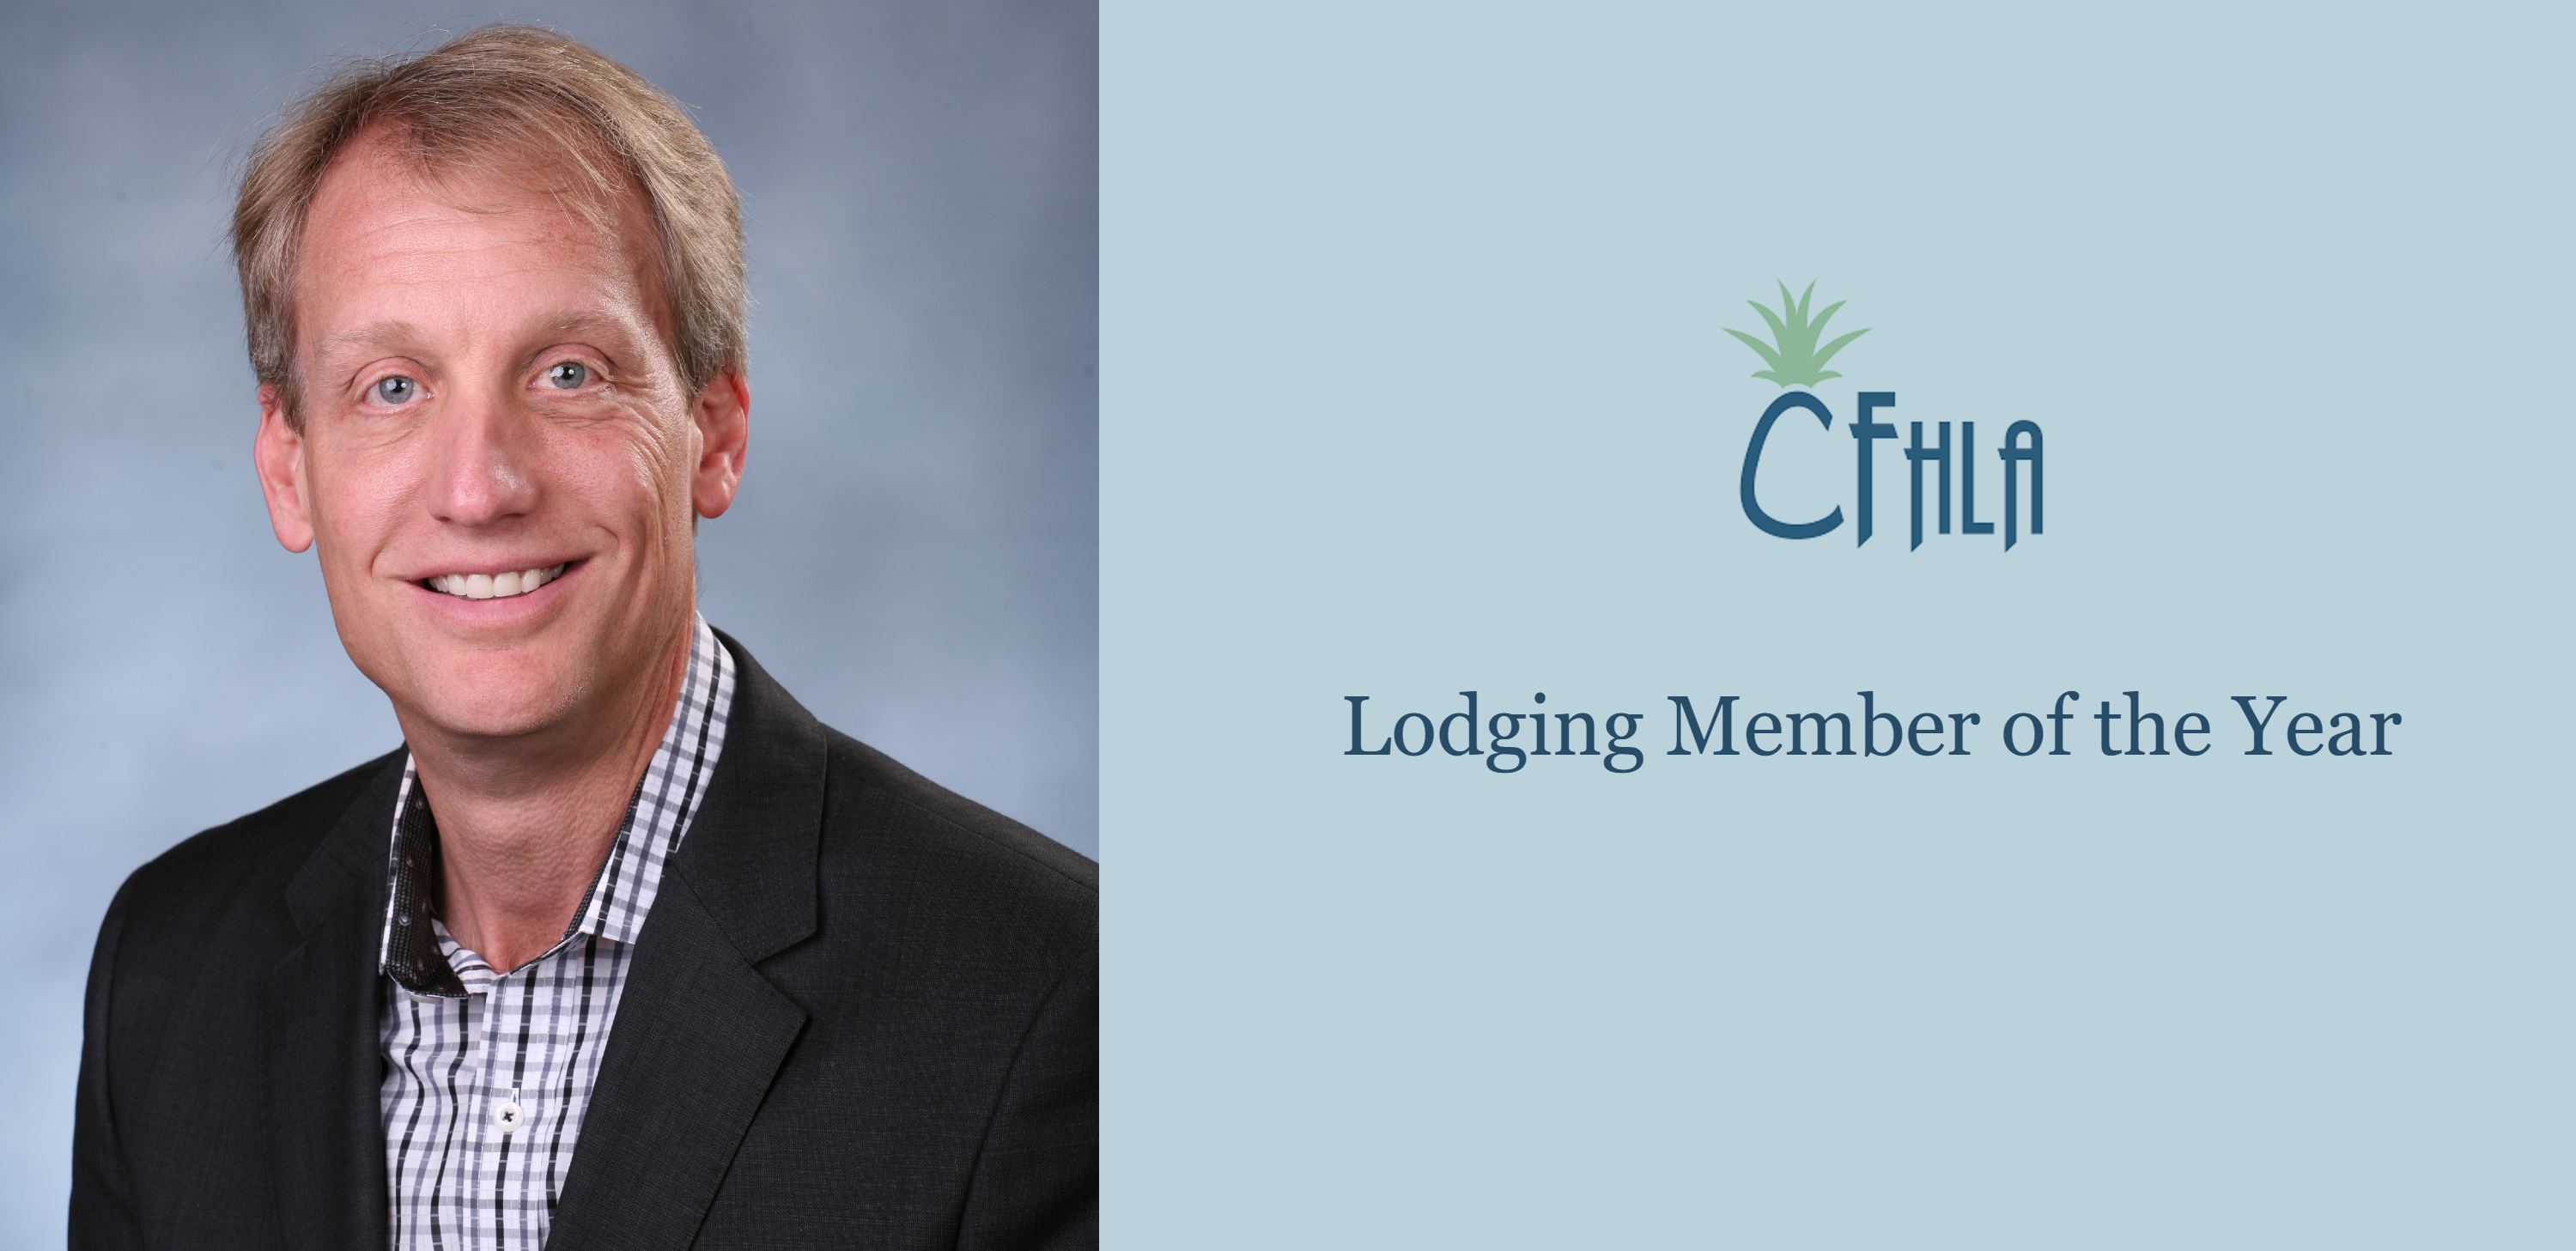 Congratulations to Brian Comes, Visit Orlando board chair and area vice president of the Hyatt Regency Orlando, for being named CFHLA’s Lodging Member of the Year